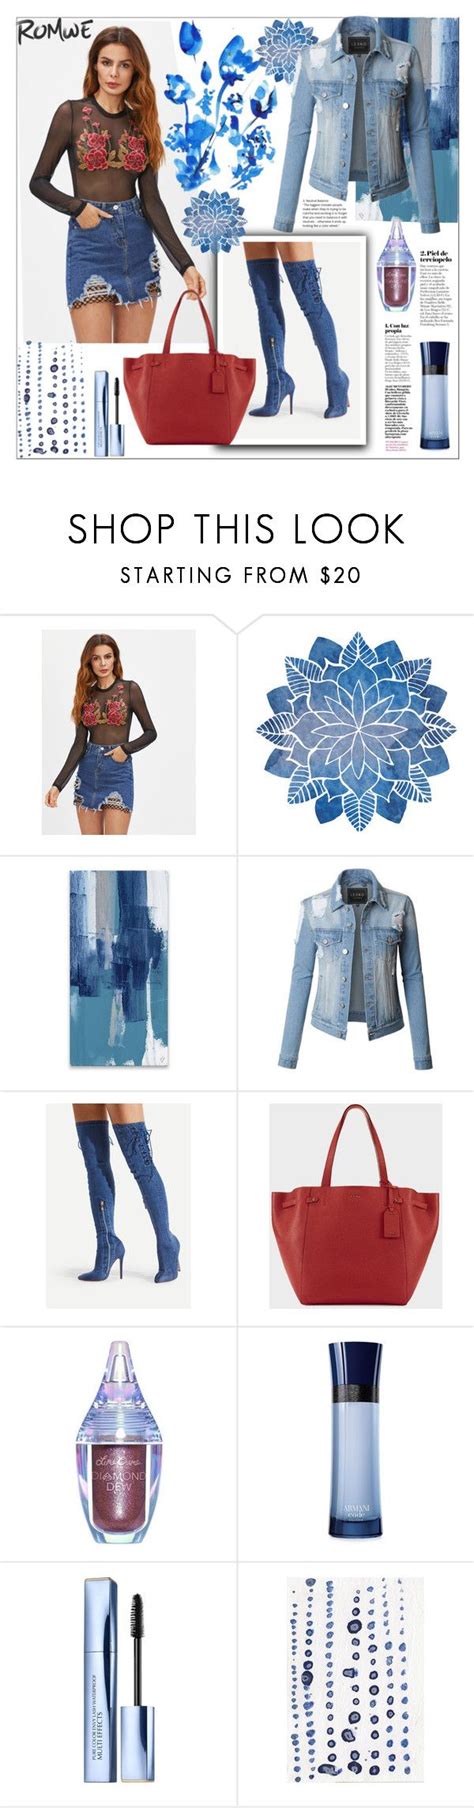 Pin On My Polyvore Creations